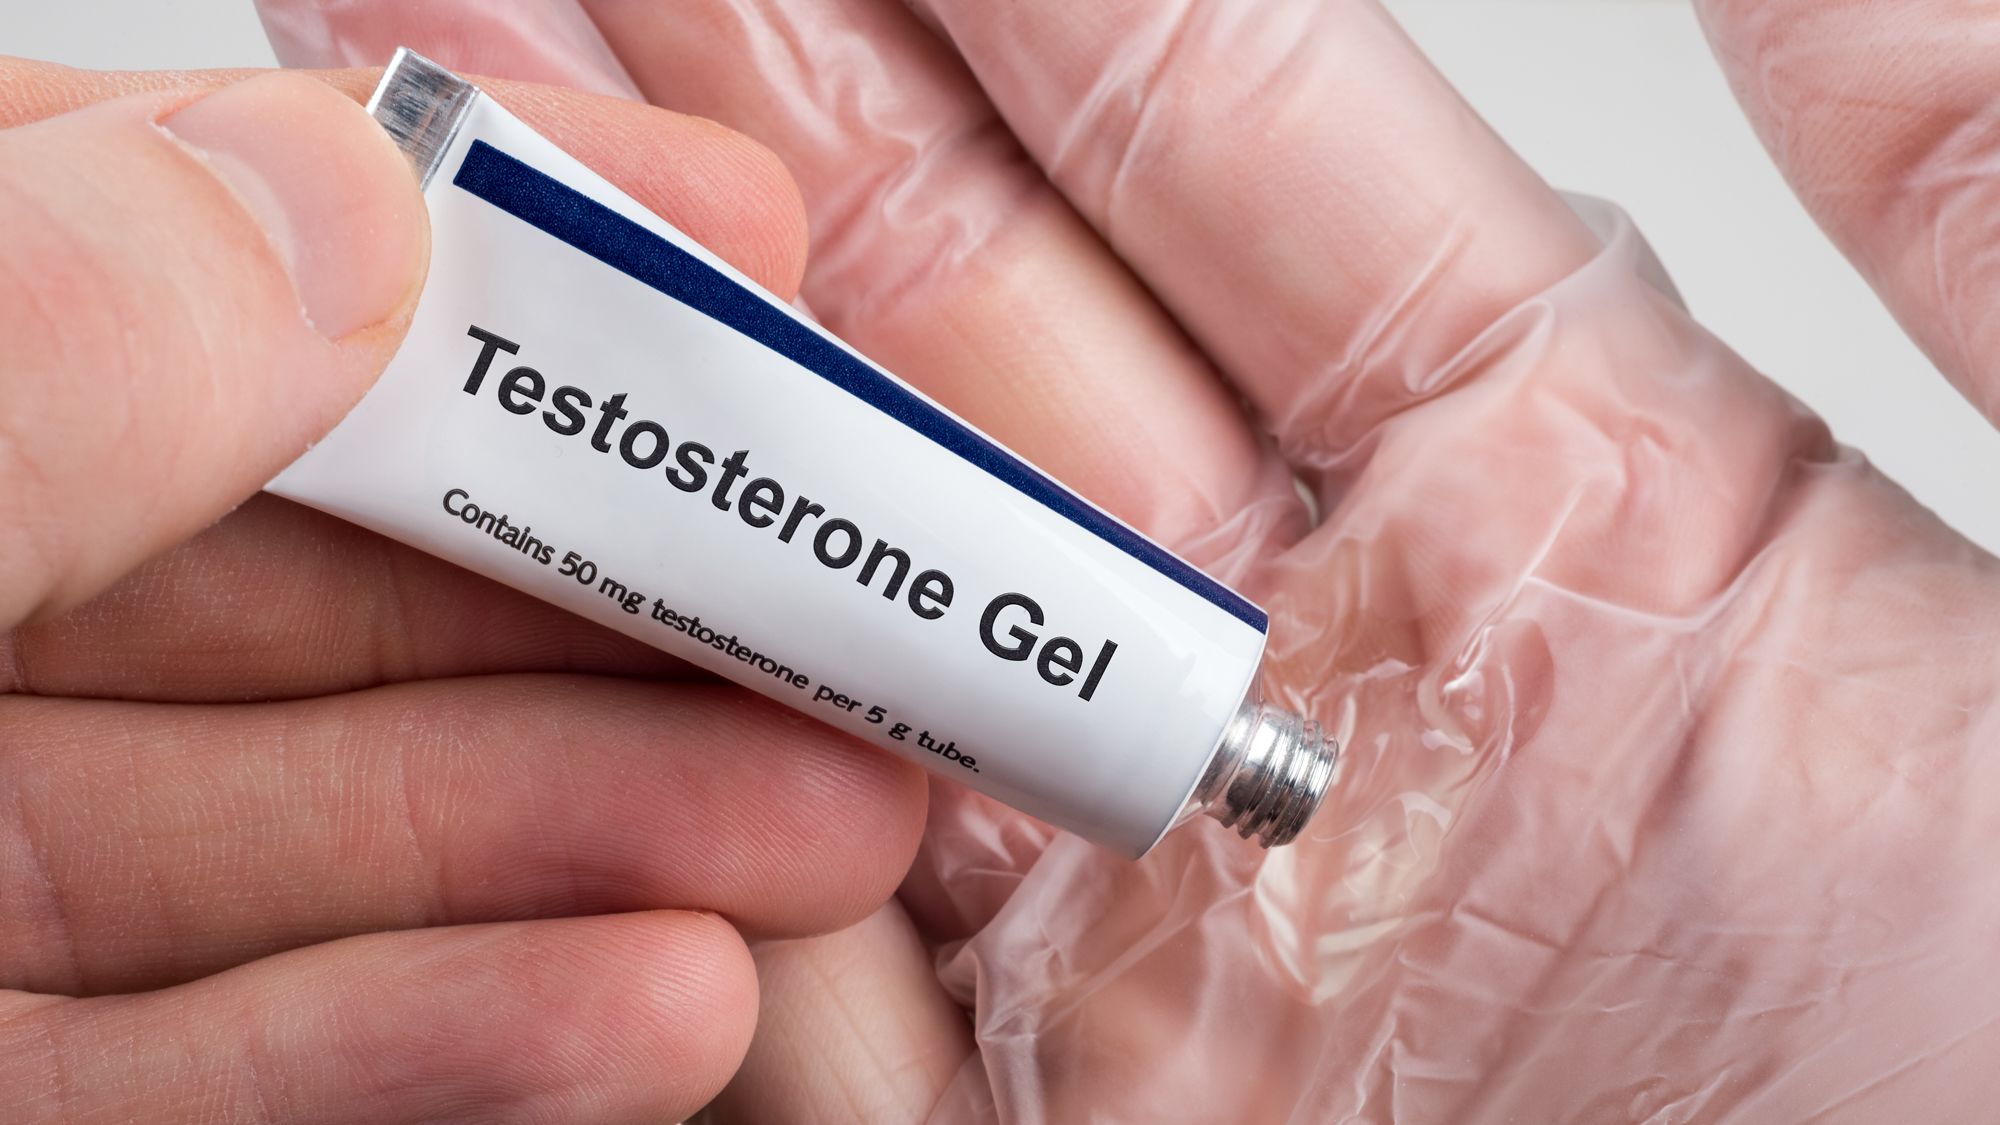 Testosterone therapy's benefits and risks | CNN